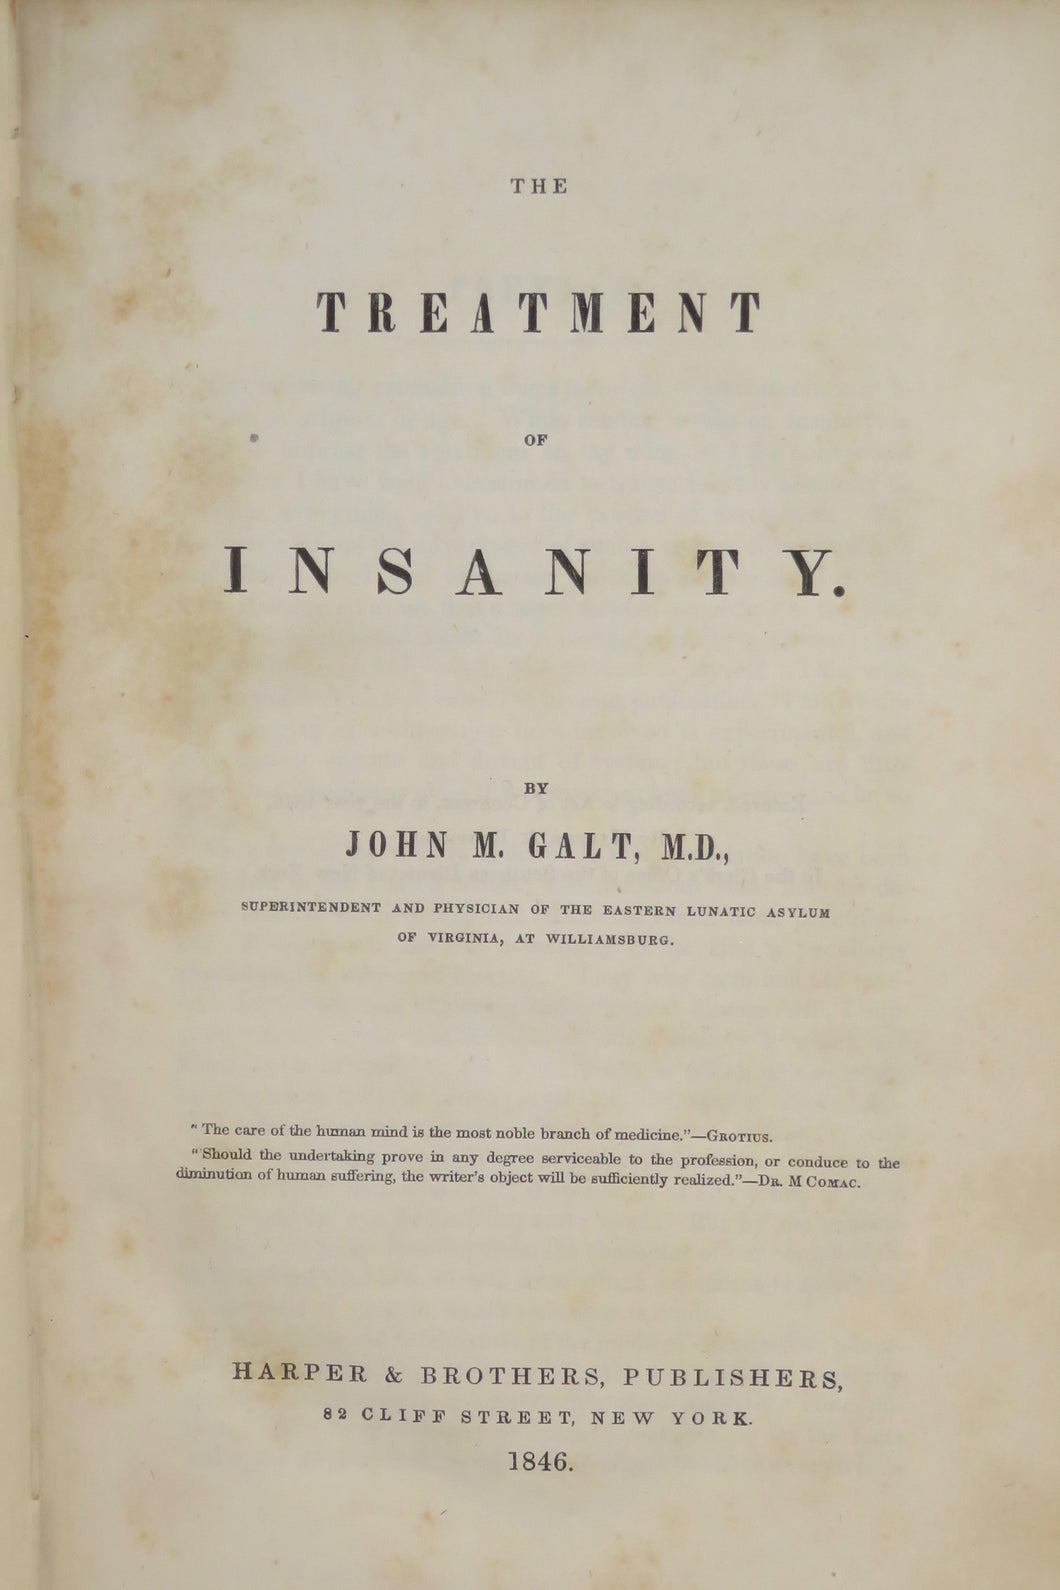 The treatment of insanity